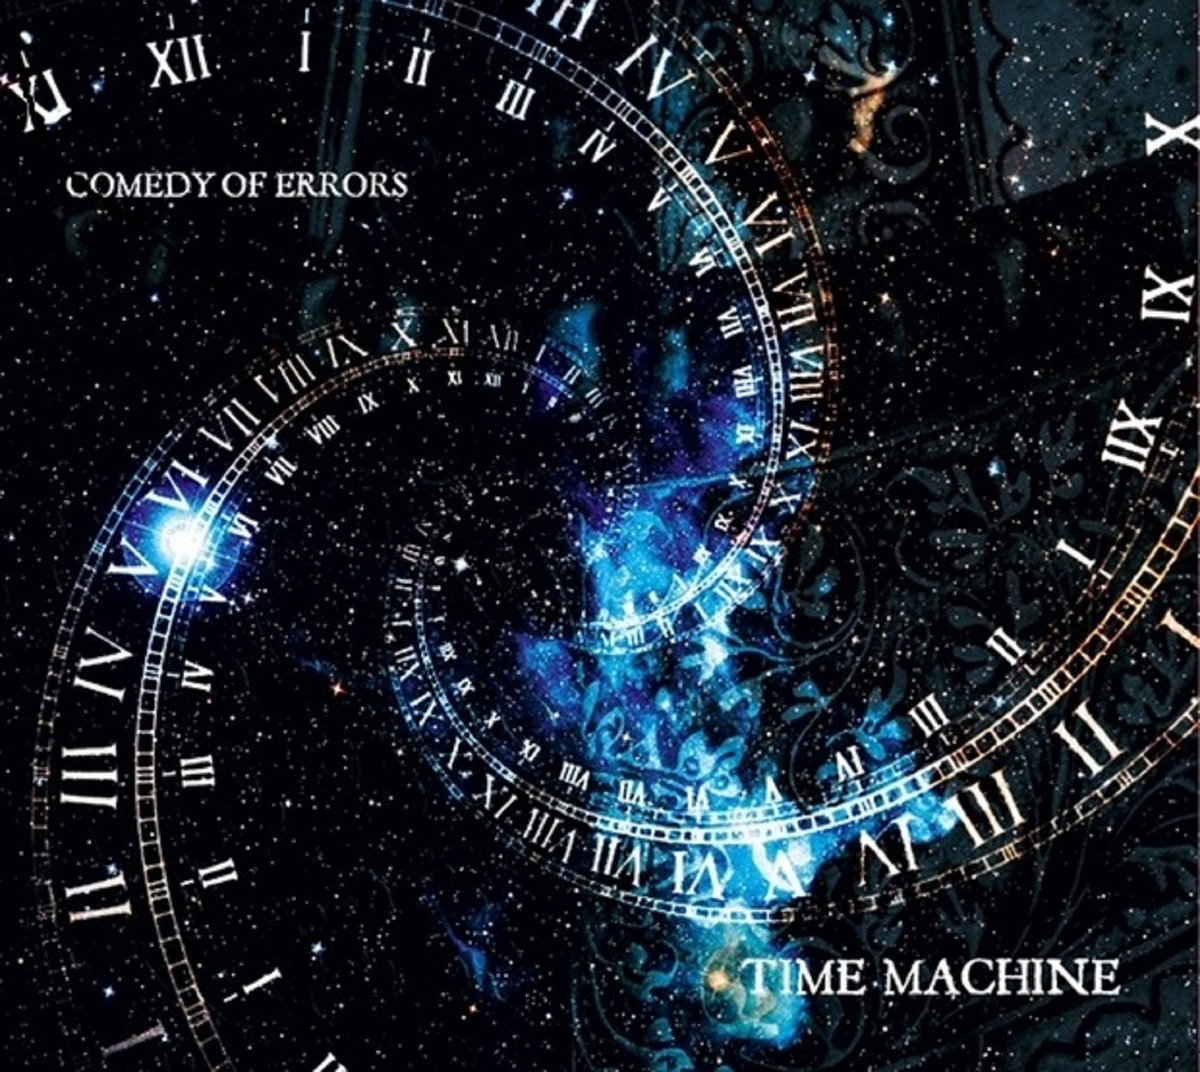 The chosen track by @Leo_Trimming on this weeks album review from @TheProgAspect is Wonderland by Comedy of Errors from album Time Machine - now playing on the #progmill @progzilla progzilla.com/listen - their new album 'Threnody for a Dead Queen'  is also out next week